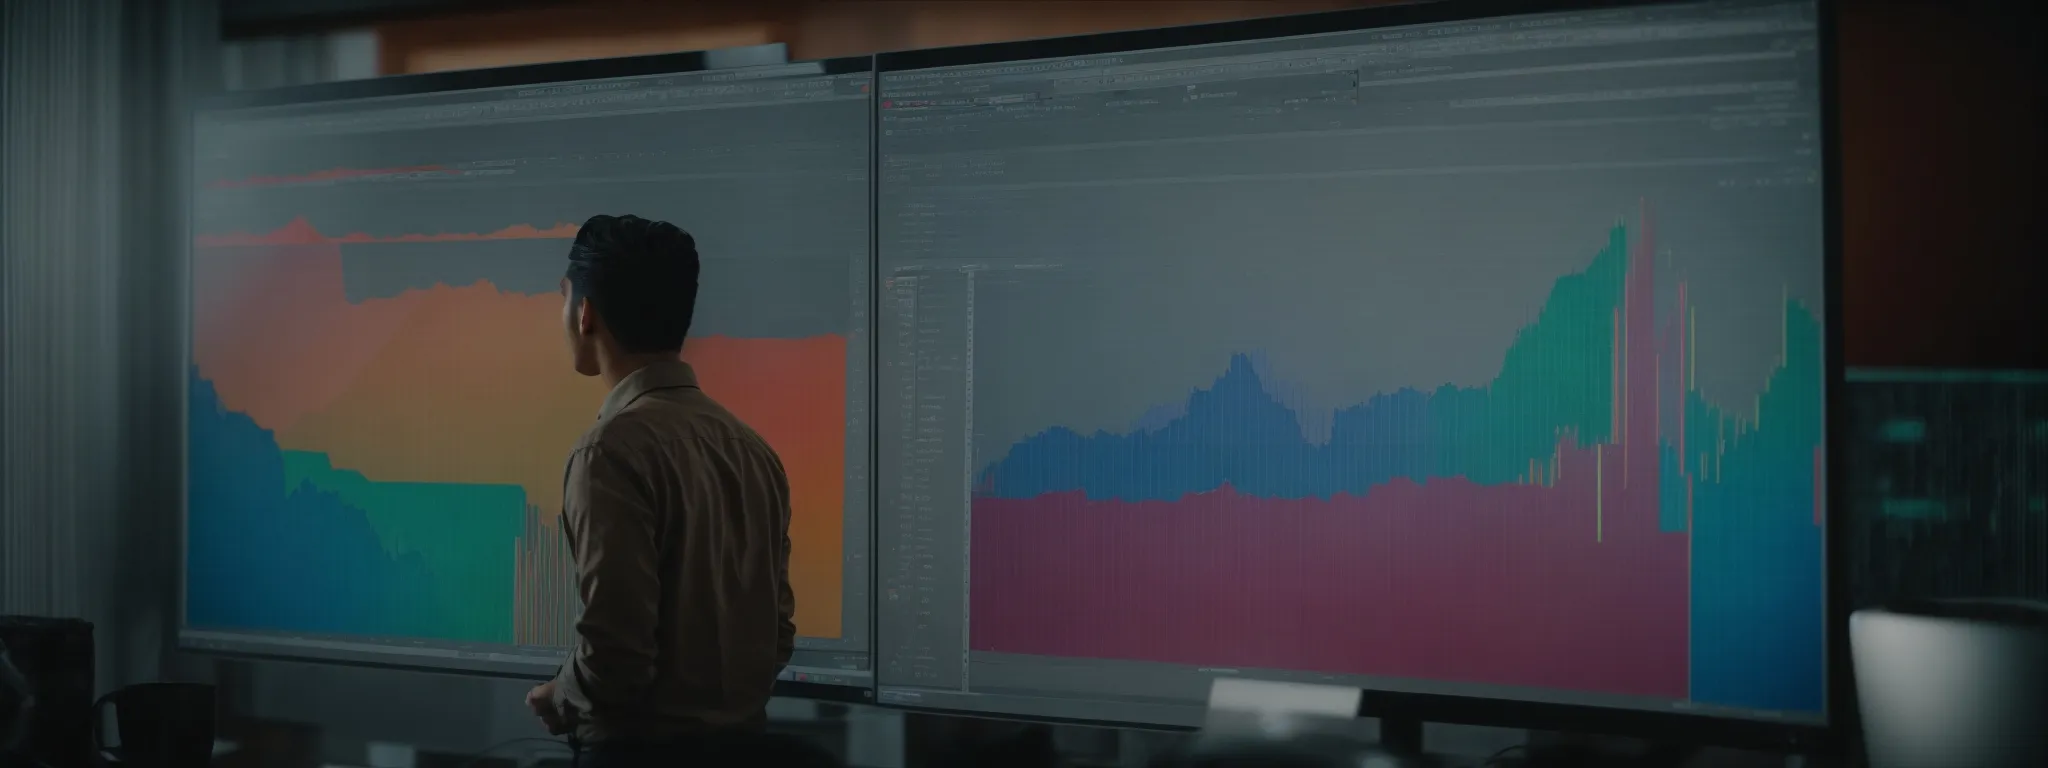 a person analyzing a colorful chart comparing two different search engine algorithms on a large monitor.